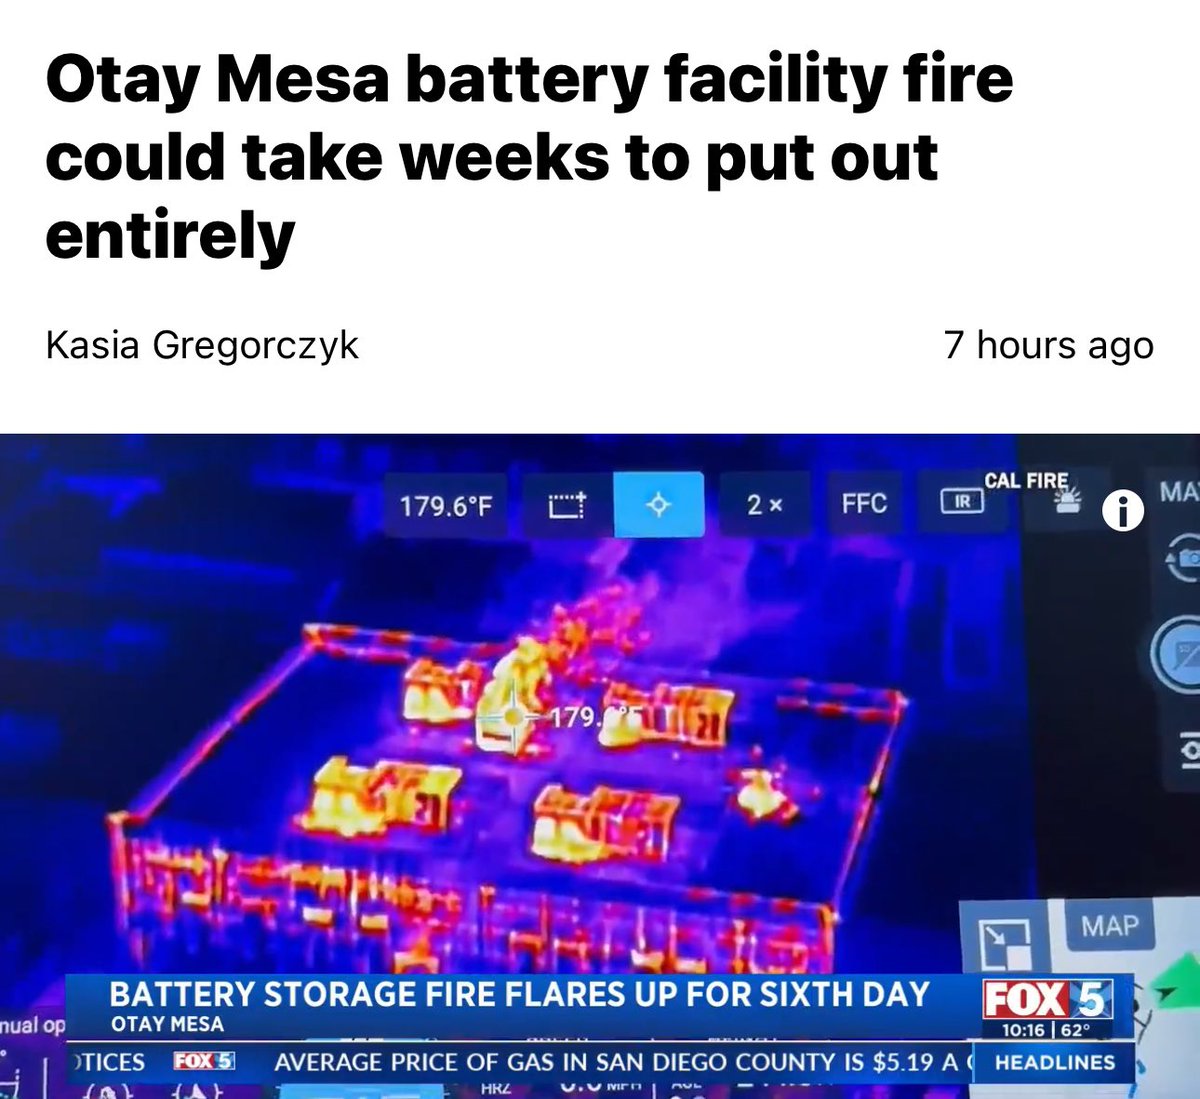 Gavin Newsom’s insane climate mandates now endanger public health & the environment 🔥LETHAL amounts of Hydrogen Cyanide & Hydrogen Chloride filled the air for 3 hours after the Otay Mesa Battery Storage fire started 7 days ago. 

Firefighters still battling the blaze say, “you